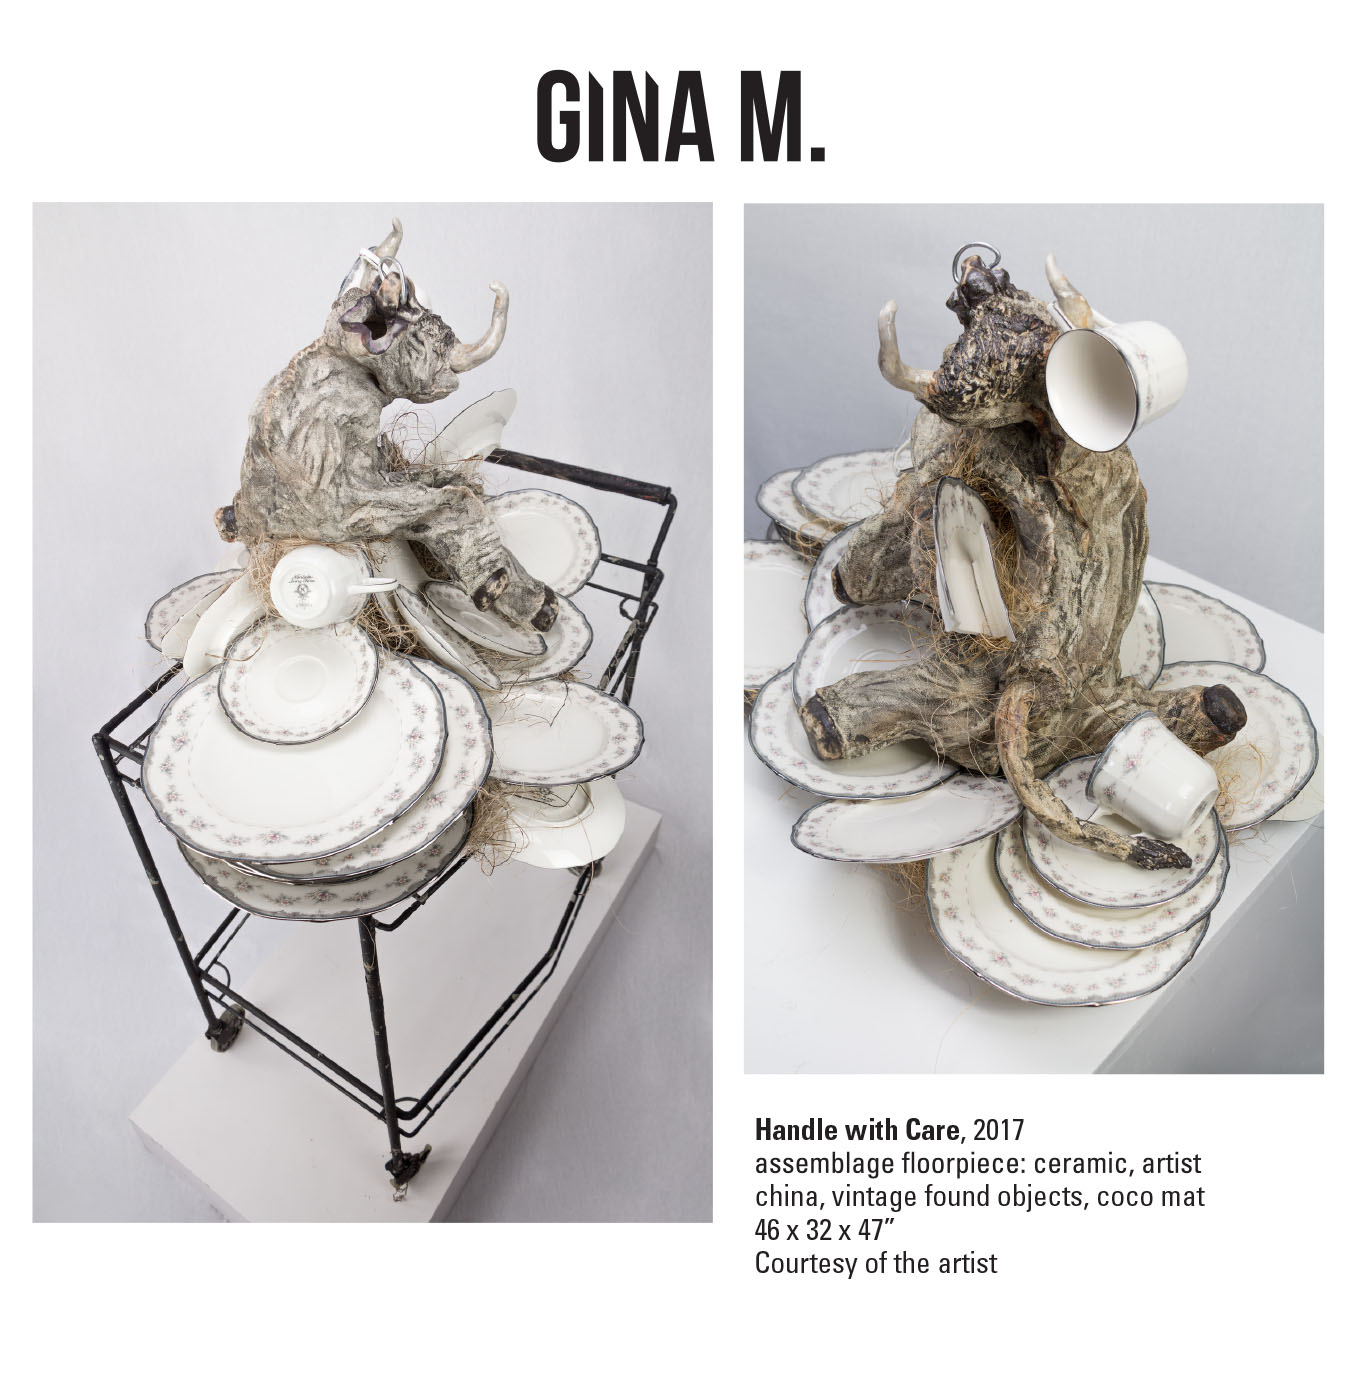 Gina M., Handle with Care, 2017. Assemblage floorpiece: ceramic, artist china, vintage found objects, coco mat. 46 x 32 x 47” Courtesy of the artist. The ‘bull in a china shop’ idiom is turned on itself in the ceramic and oxide sculpture Handle with Care. A toy bull, after assaulting a stack of china, twists with rage as a shattered platter pierces his side and stuffing spills out. I used my own wedding china to create this piece giving the china a chance to get even  .  In all my work there is a whimsy with a dark side. My personal narrative uses innocent childhood imagery like teddy bears, toys, and puppets to create the reactionary expressions of my inner emotional life. When something happens to me and triggers a buried emotion, a lost sentiment or a hidden pain, I must reconstruct and resurrect it outside of myself and find the story behind it.     Combining assemblage with ceramics fills my current body of work. The homespun construction and textured surfaces simulate threadbare fabric and tattered fur.     I select materials based on their authenticity to my process. I choose clay because of its fragility, its relationship to the earth, and its tradition in arts and craft. I incorporate recycled materials such as wood and found objects because of their nostalgia and reference to aging, decay and decomposition.